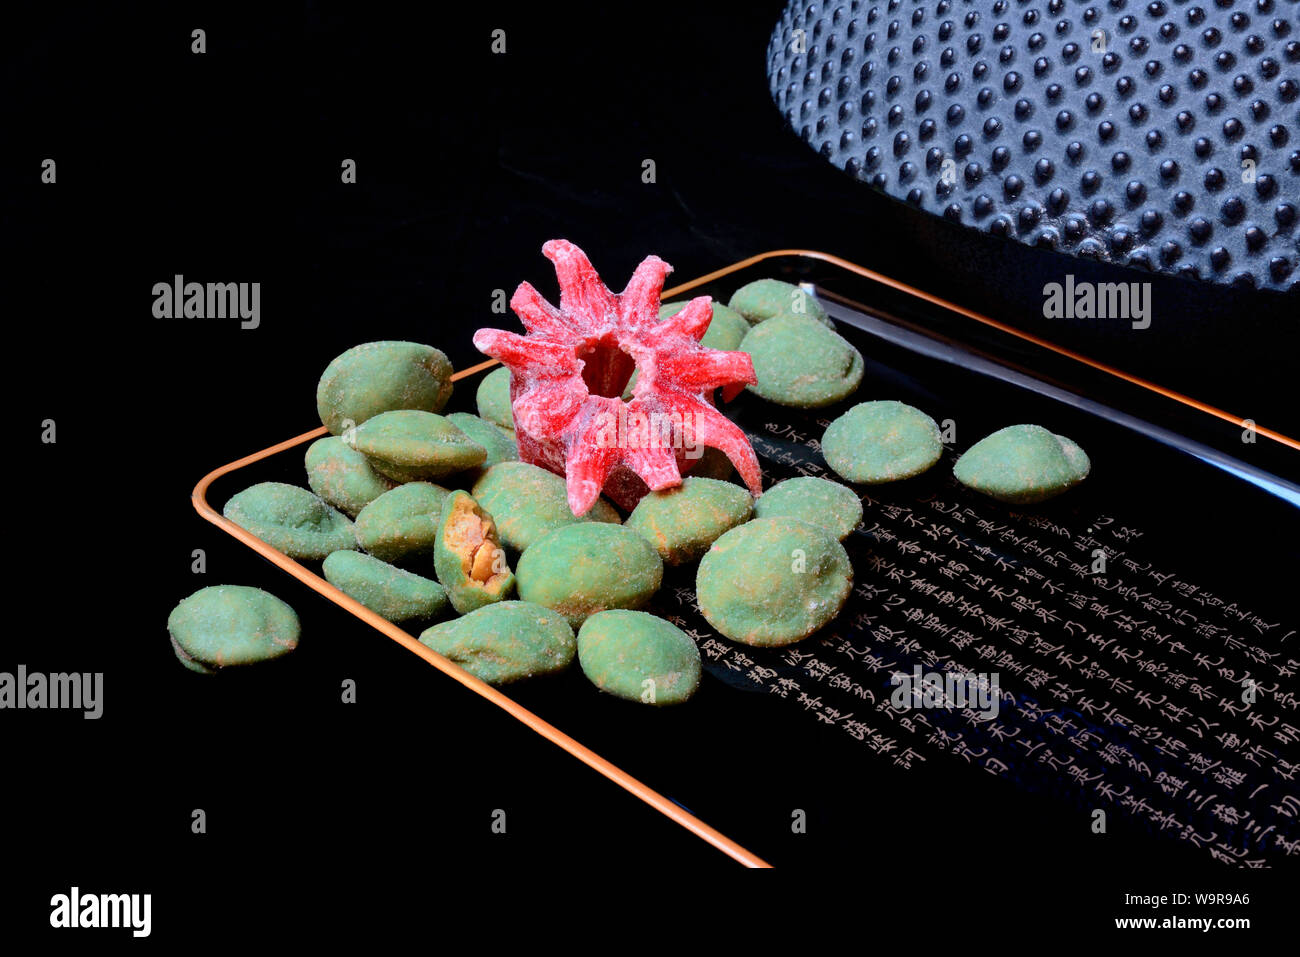 Wasabi peanuts and candied hibiscus blossom Stock Photo